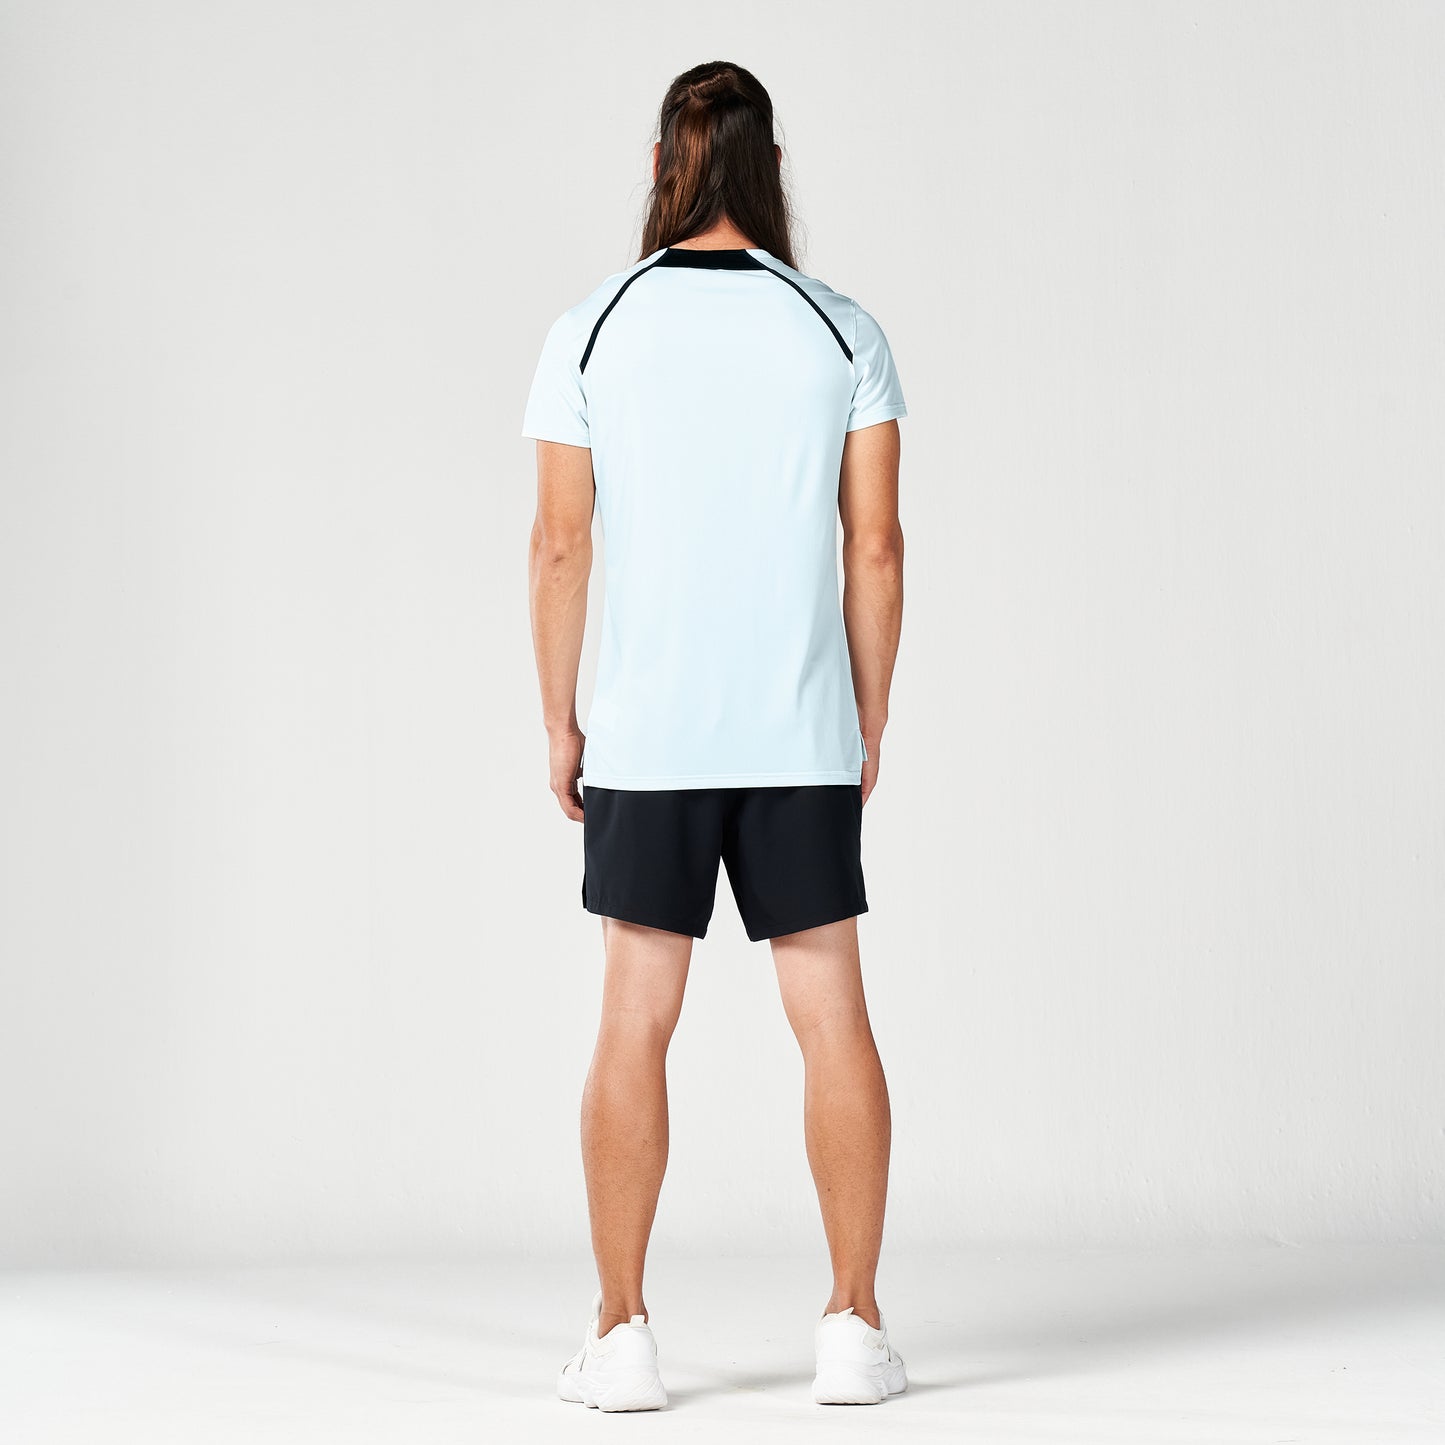 squatwolf-gym-wear-code-v-neck-muscle-tee-skylight-marl-workout-shirts-for-men